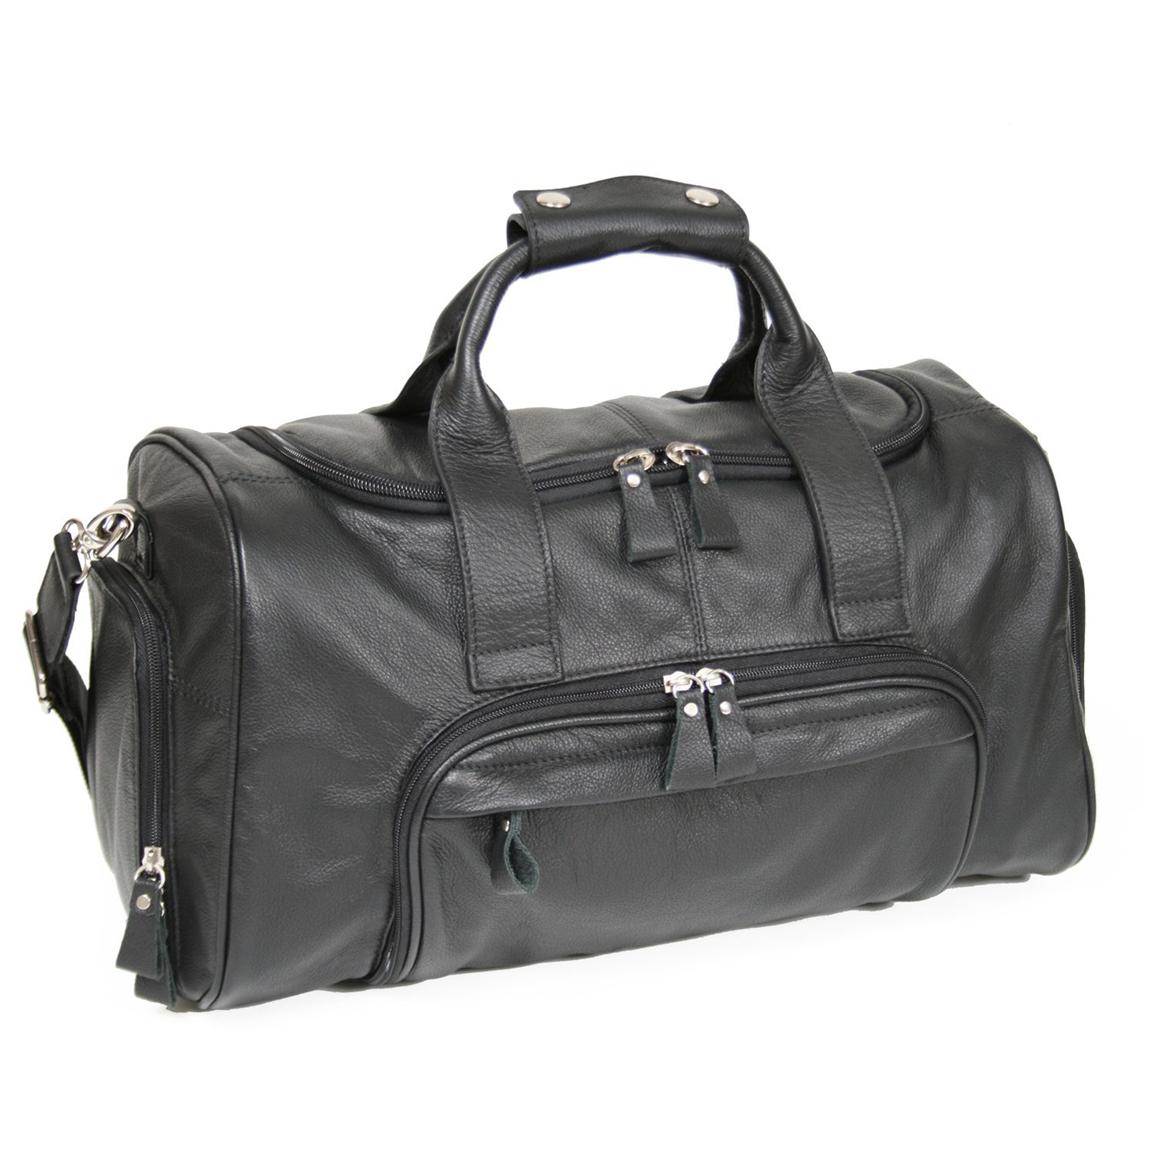 Royce® Leather Sports Bag - 219684, Luggage at Sportsman's Guide